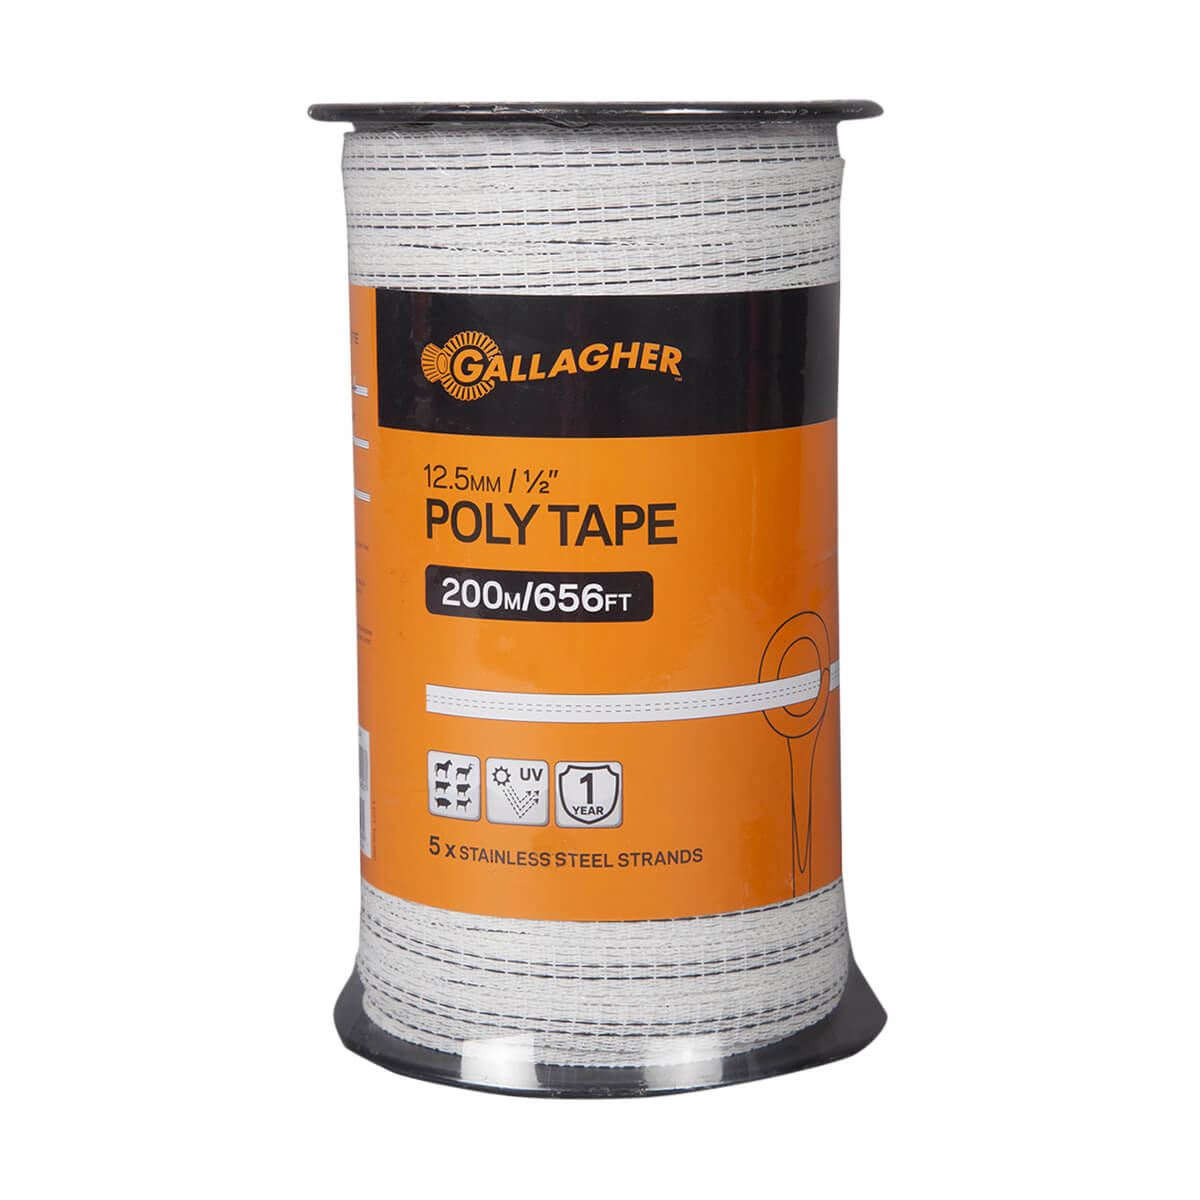 Gallagher 0.5-in Poly Tape - 200 m